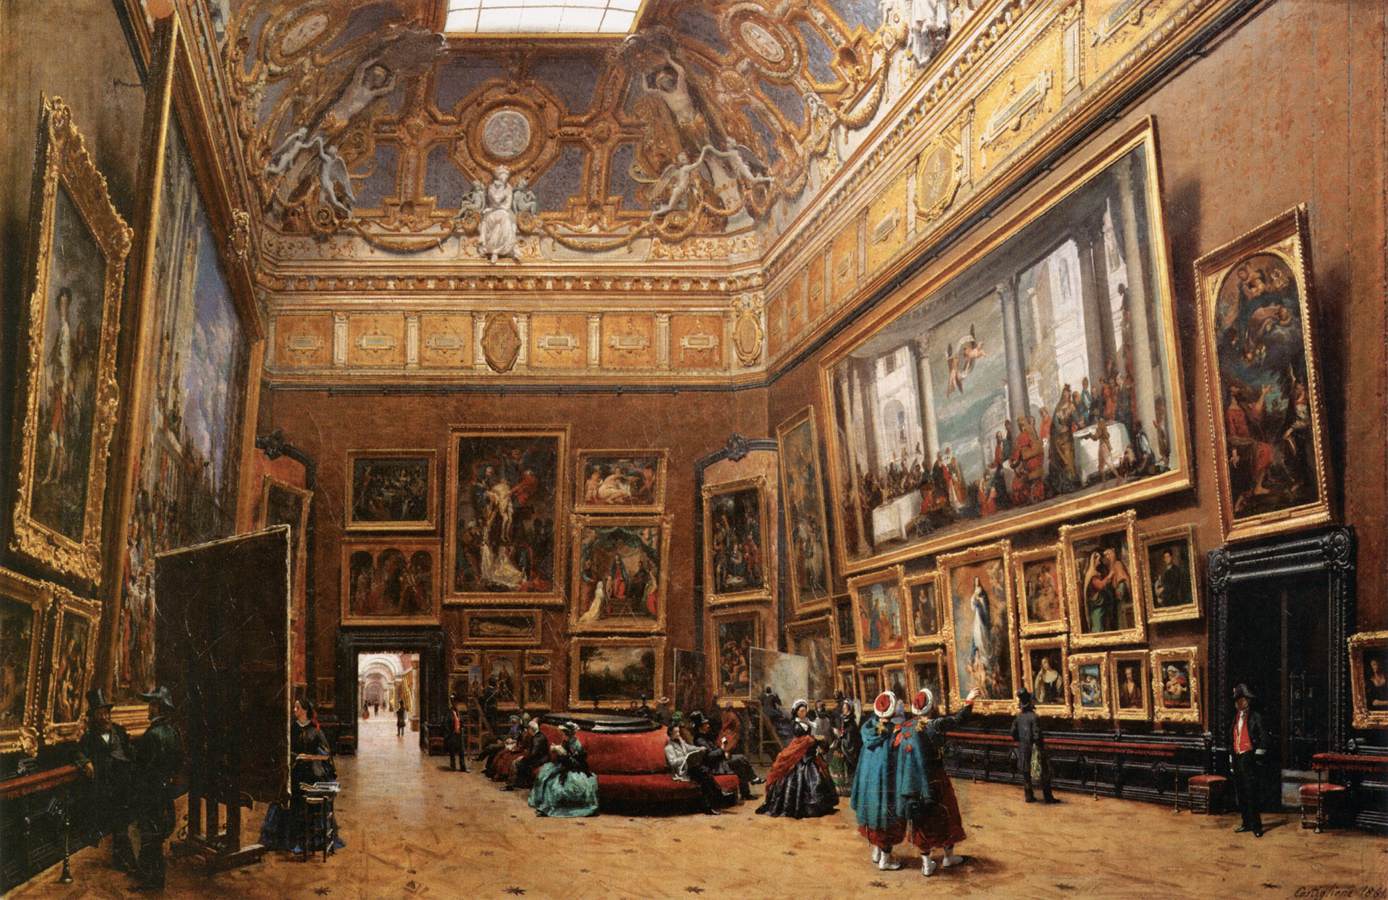 View of the Grand Salon Carré in the Louvre